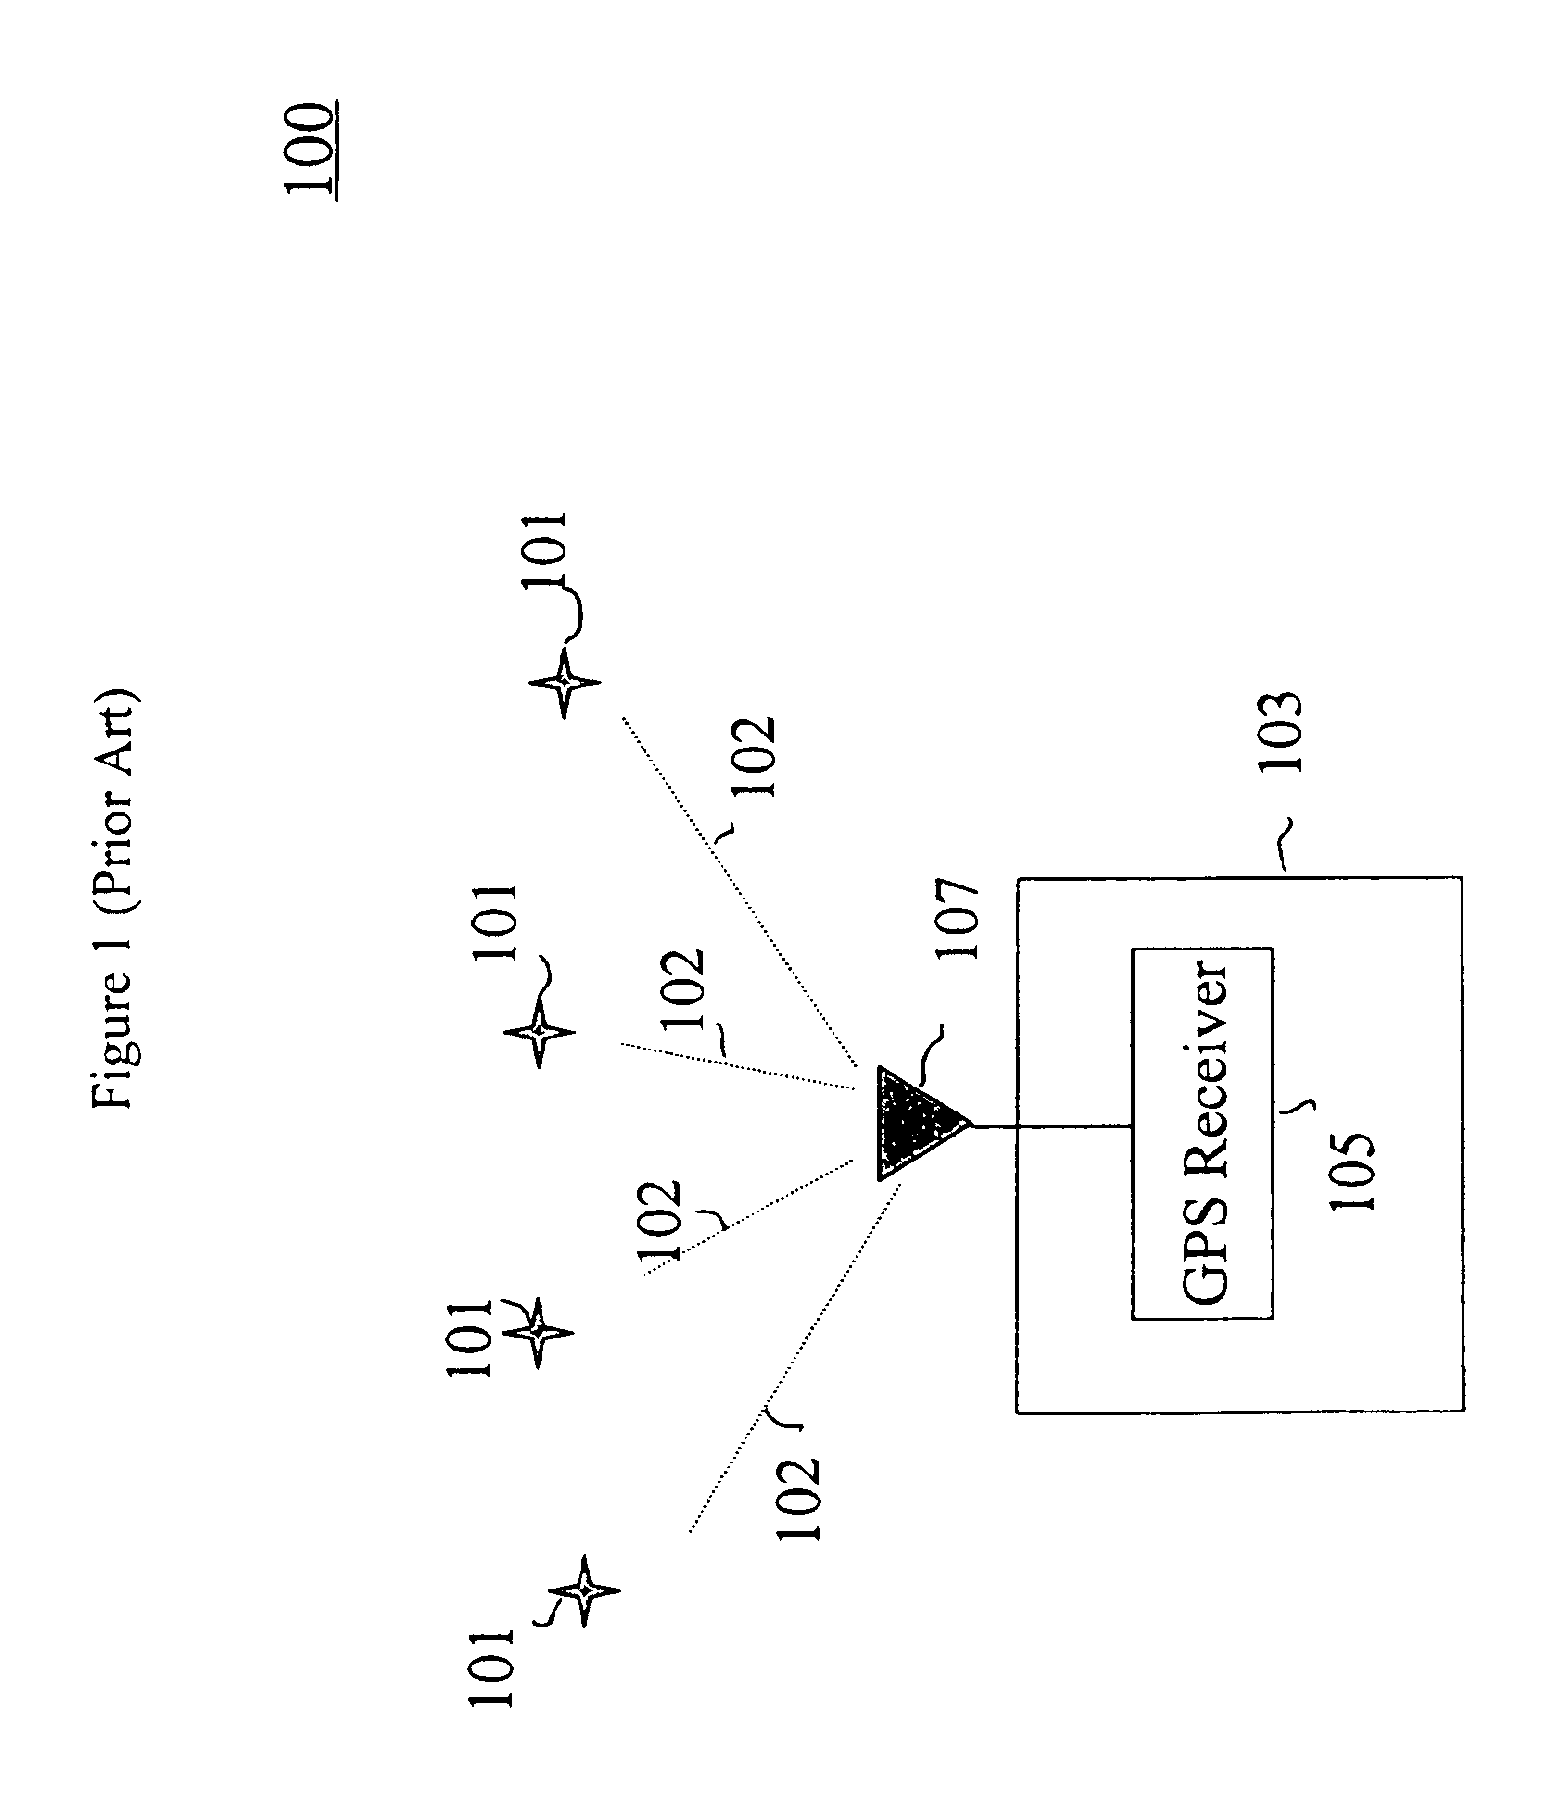 GPS signal acquisition based on frequency-domain and time-domain processing